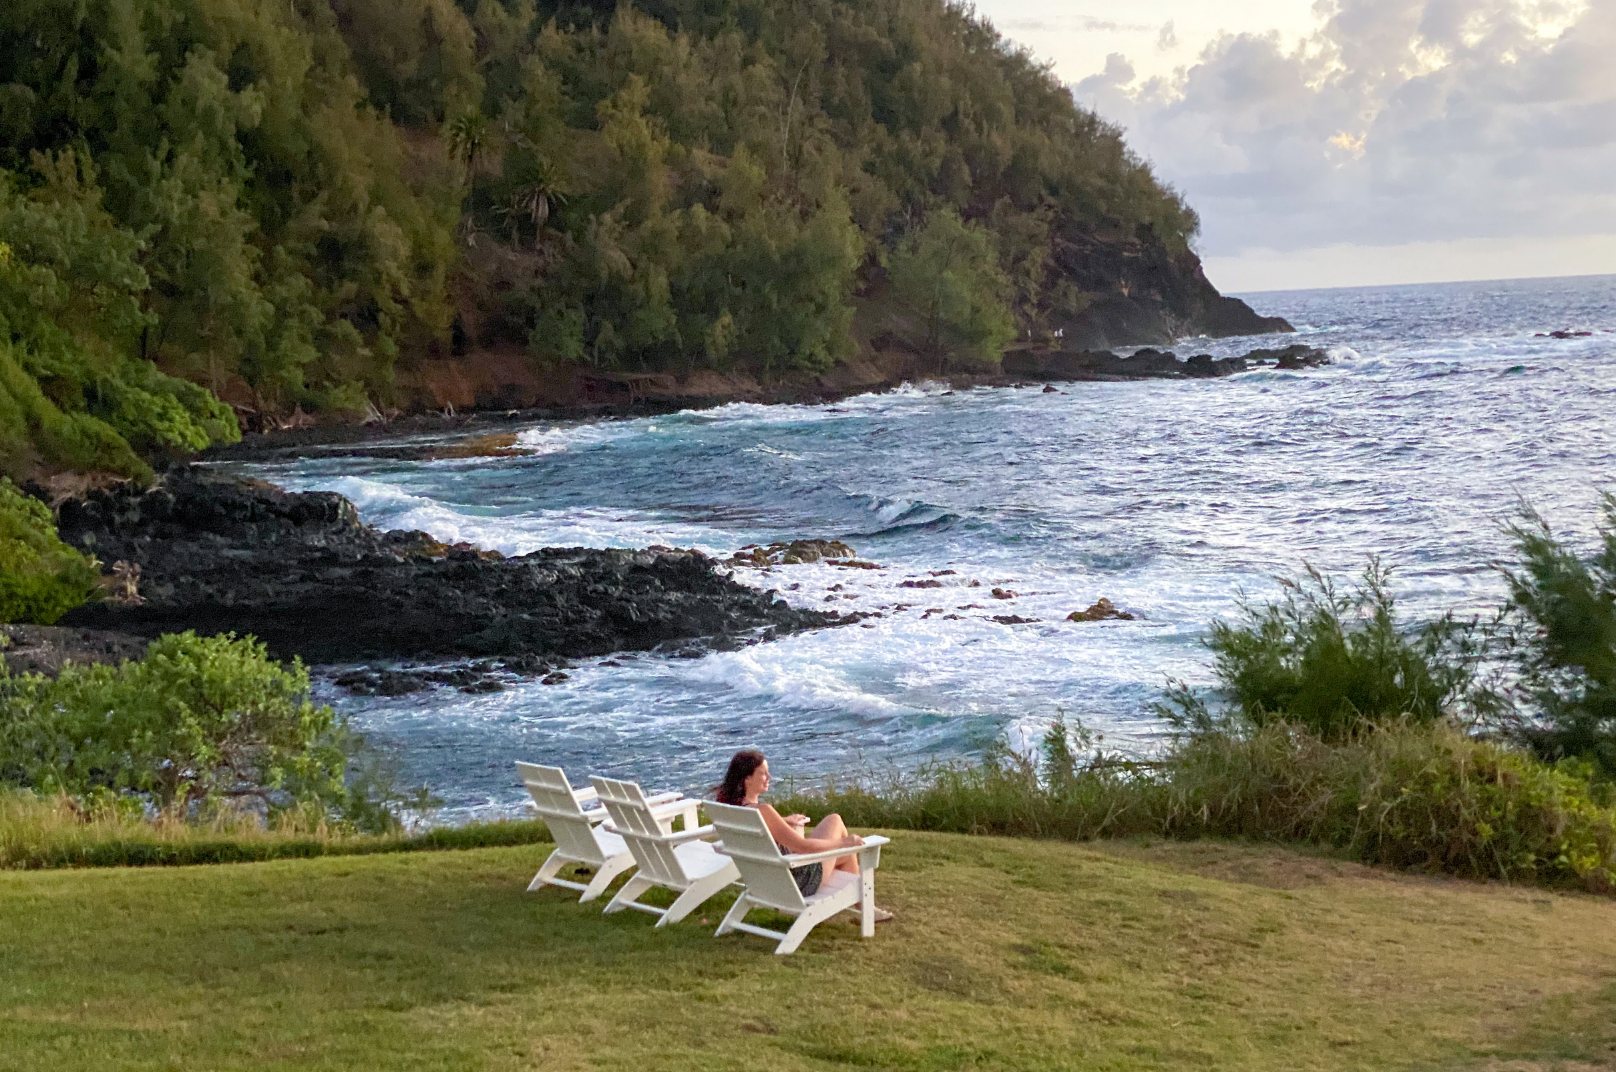 Romantic Things To Do in Hawaii